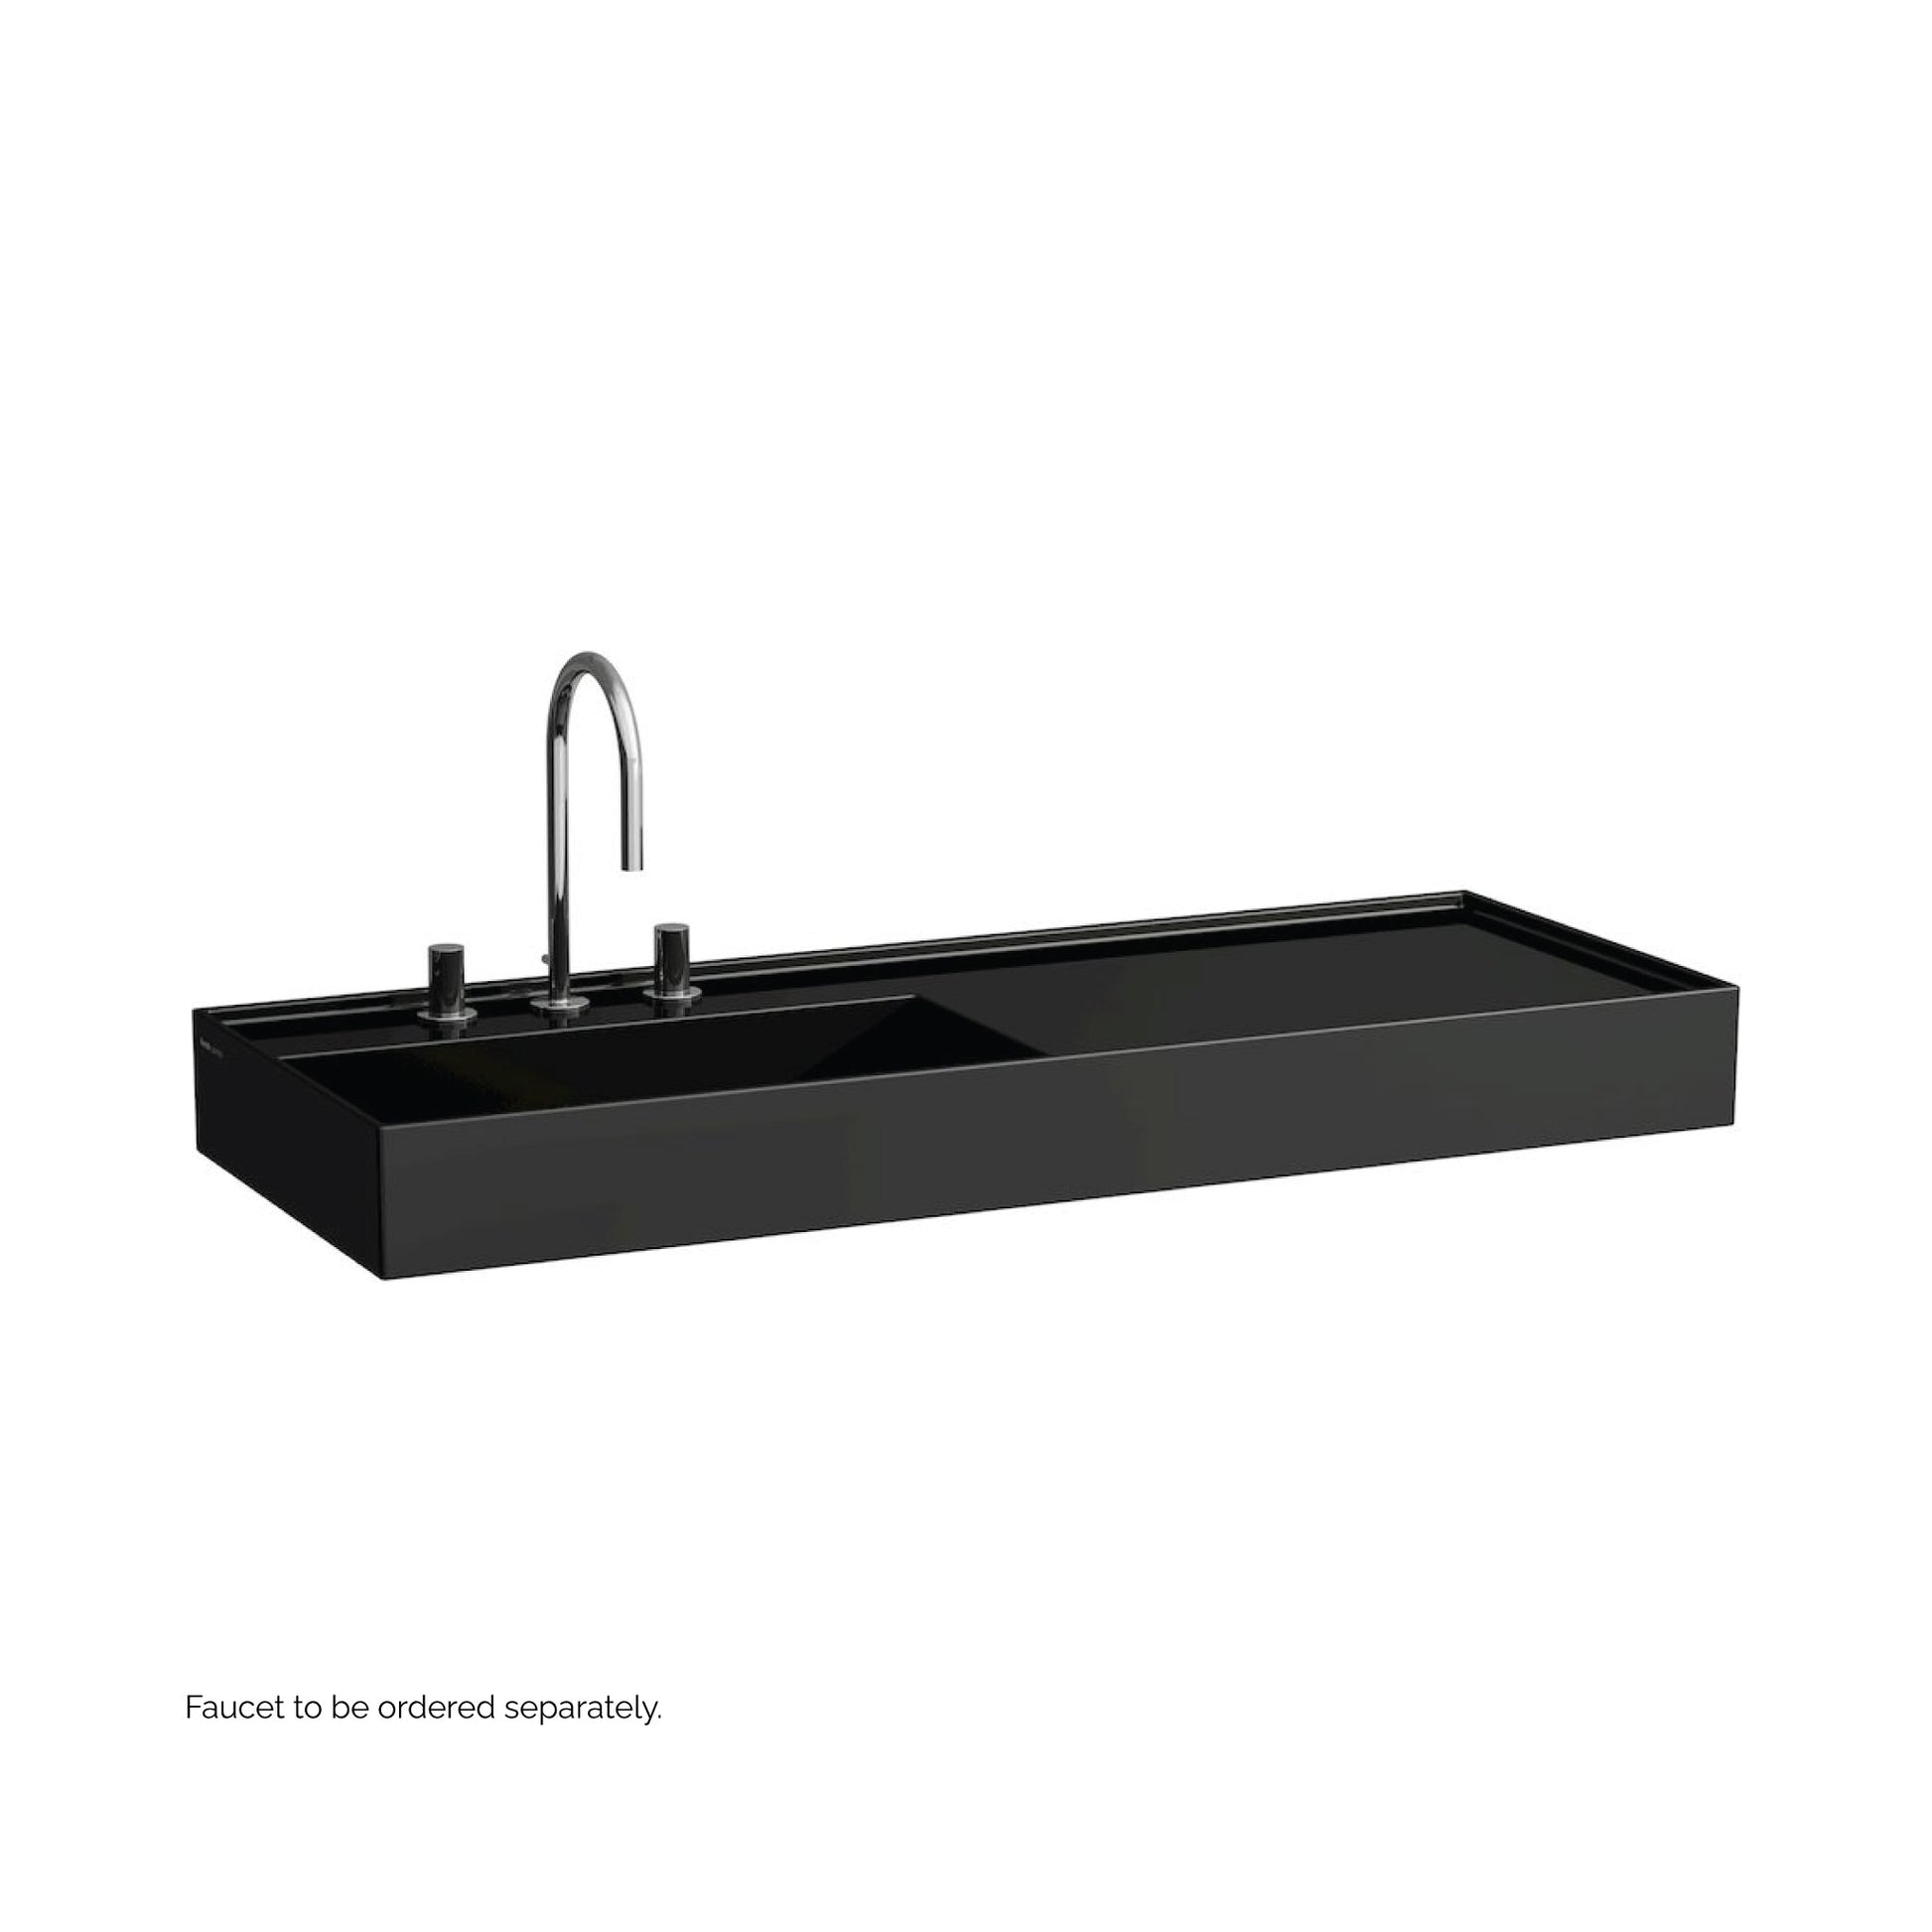 Laufen Kartell 47" x 18" Glossy Black Wall-Mounted Shelf-Right Bathroom Sink With 3 Faucet Holes